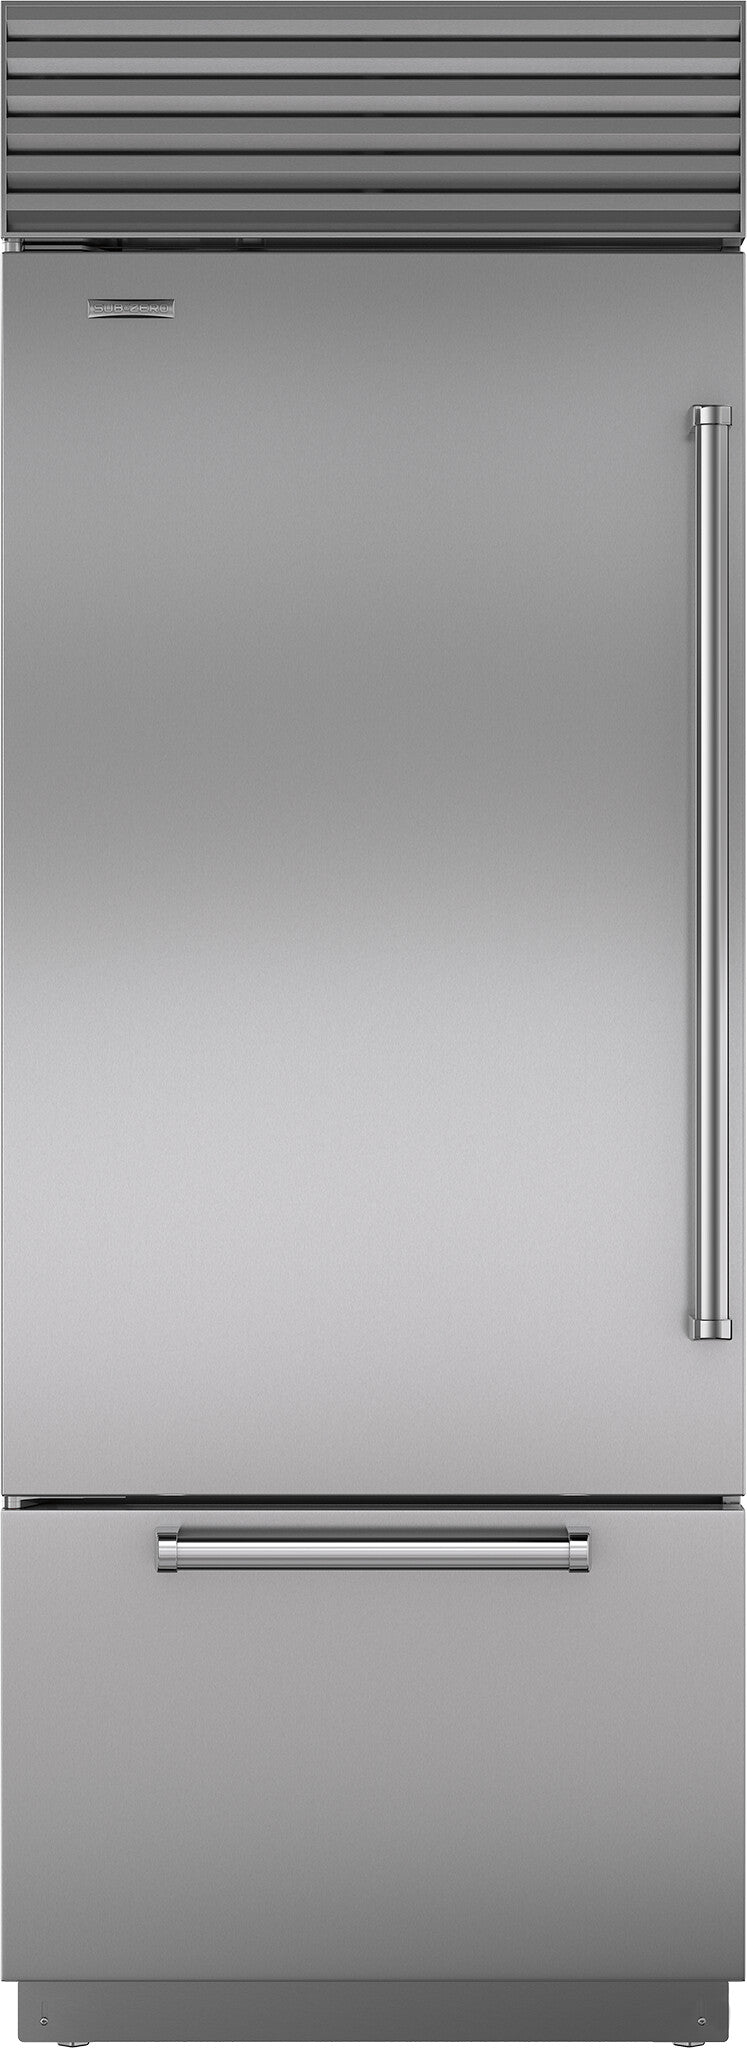 Sub-Zero - 30 Inch 17 cu. ft Built In / Integrated Bottom Mount Refrigerator in Stainless - CL3050UID/S/T/L